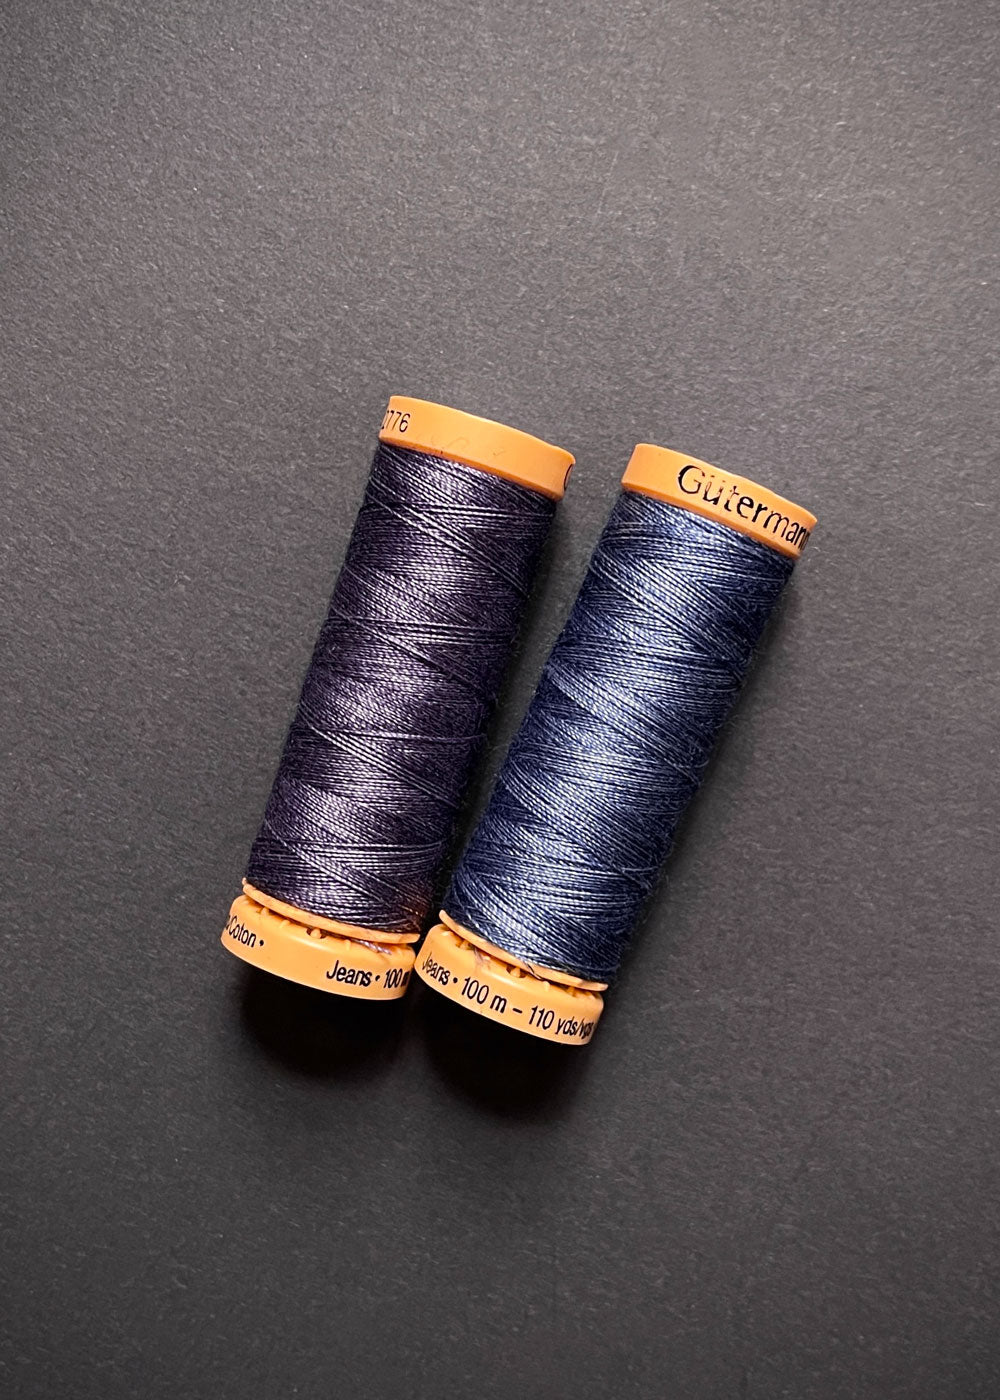 Jeans denim thread for stock, 100 m, 70% polyester, 30% cotton